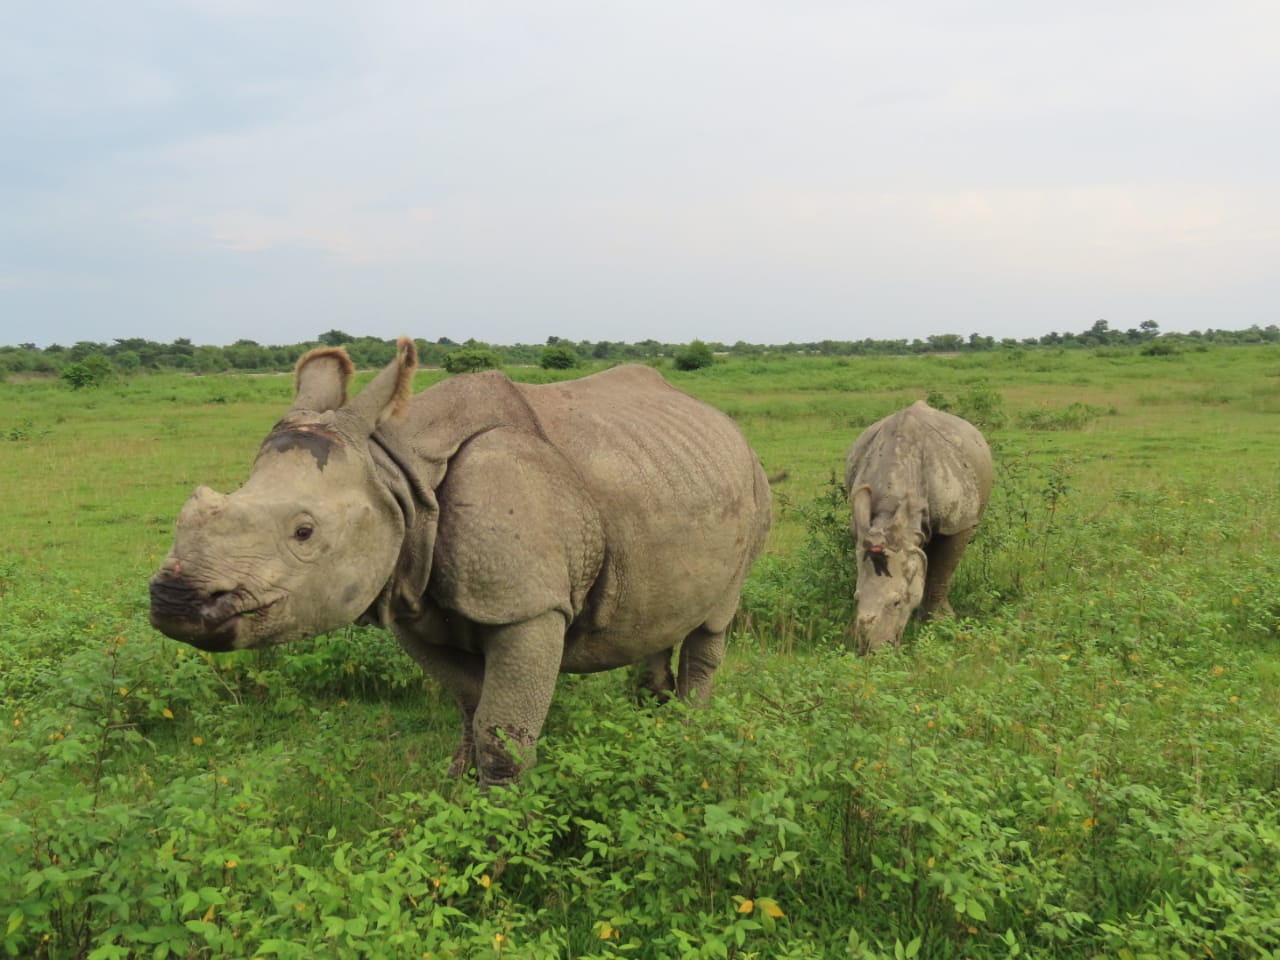 Translocated rhinos thriving in their adopted home